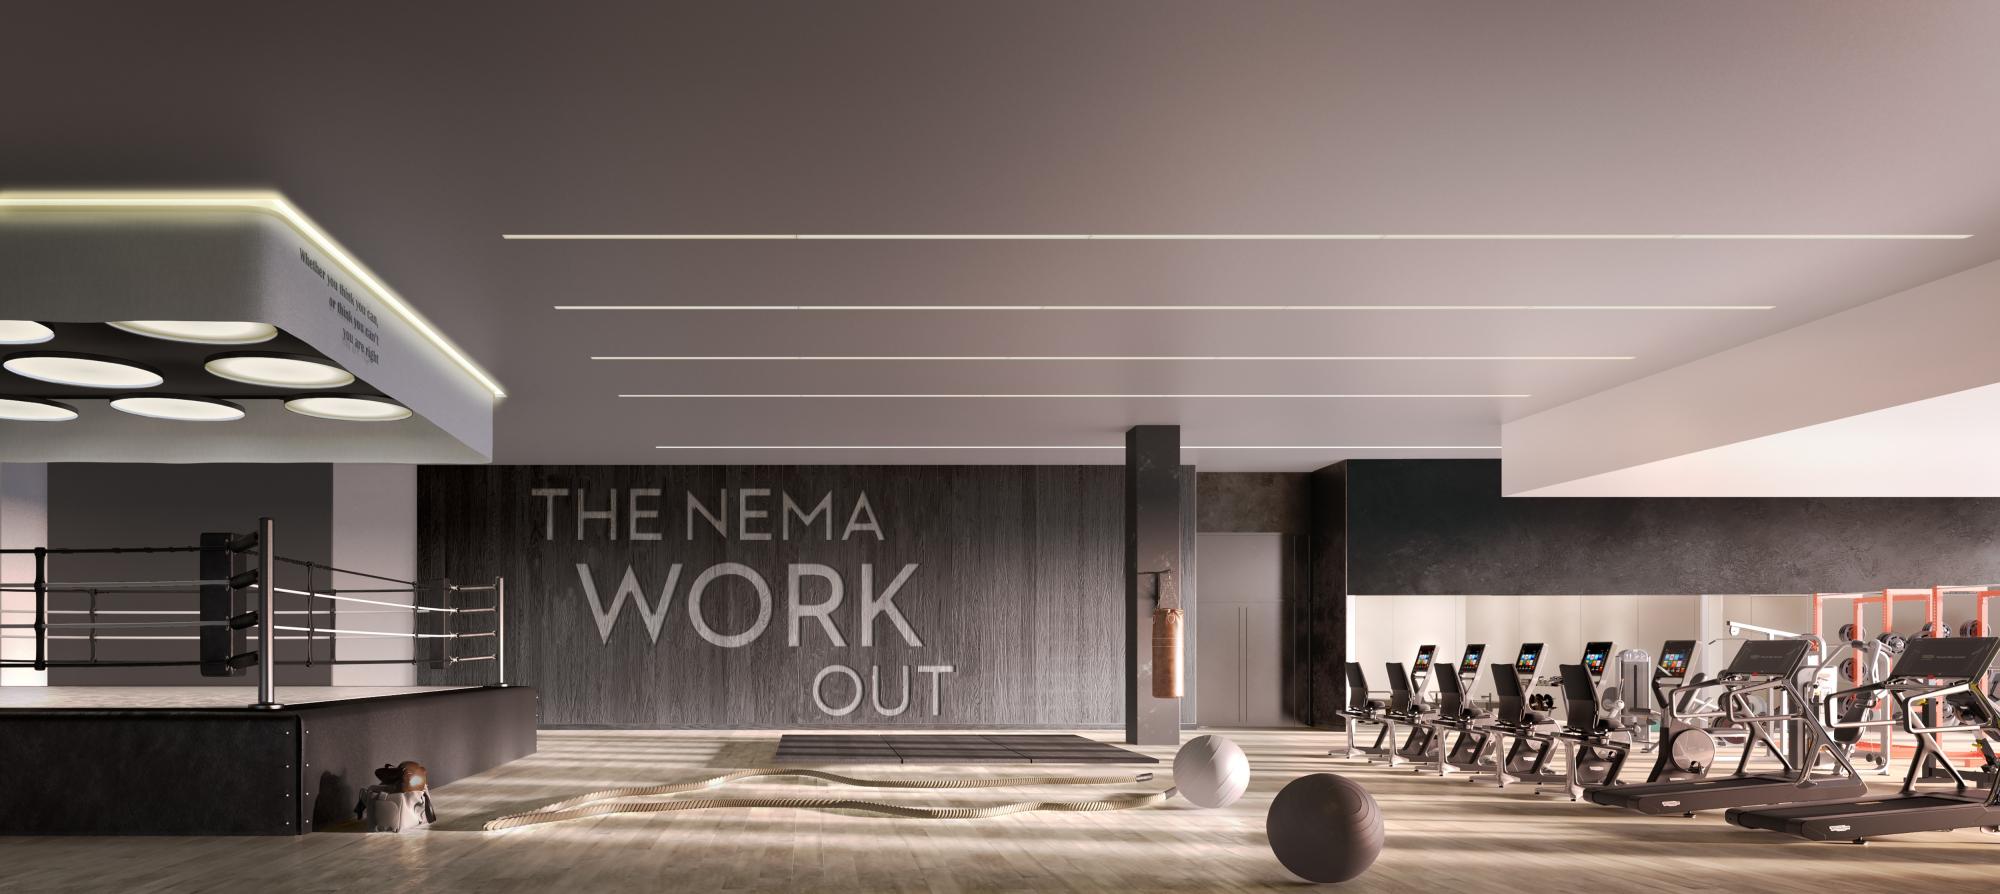 NEMA luxury Chicago rentals provide renters with a state-of-the-art wellness center.